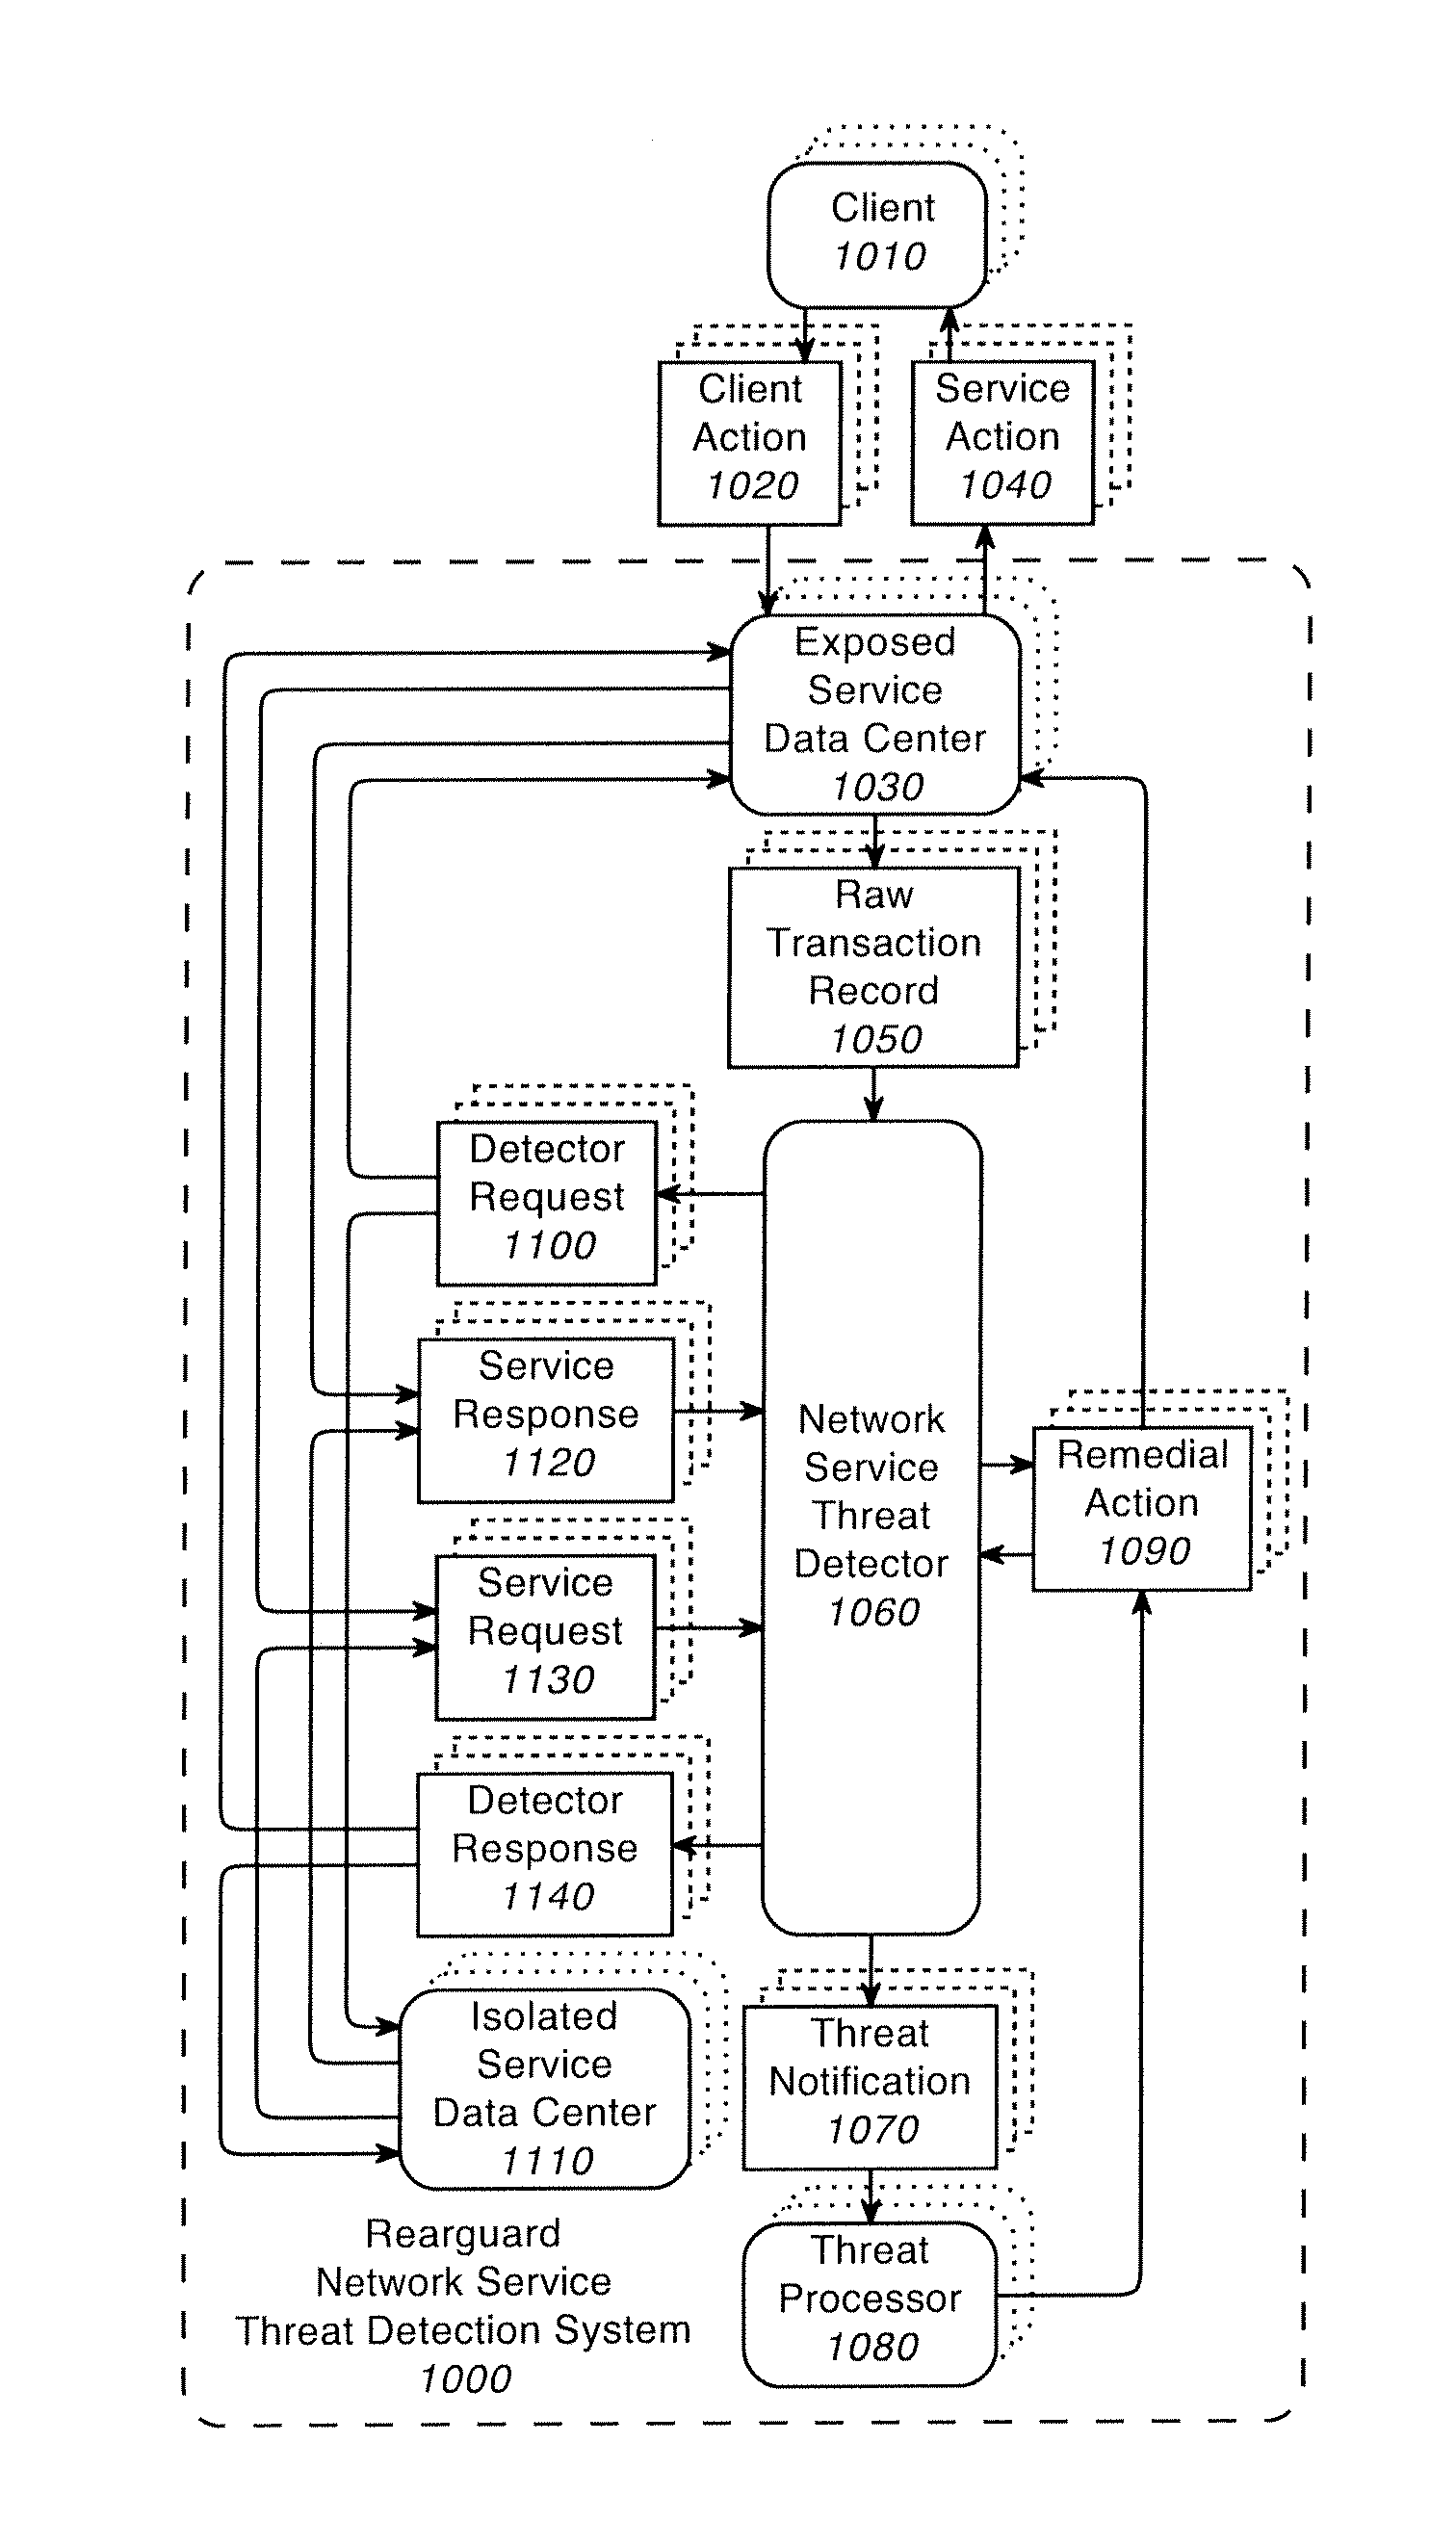 System and method for network security including detection of man-in-the-browser attacks